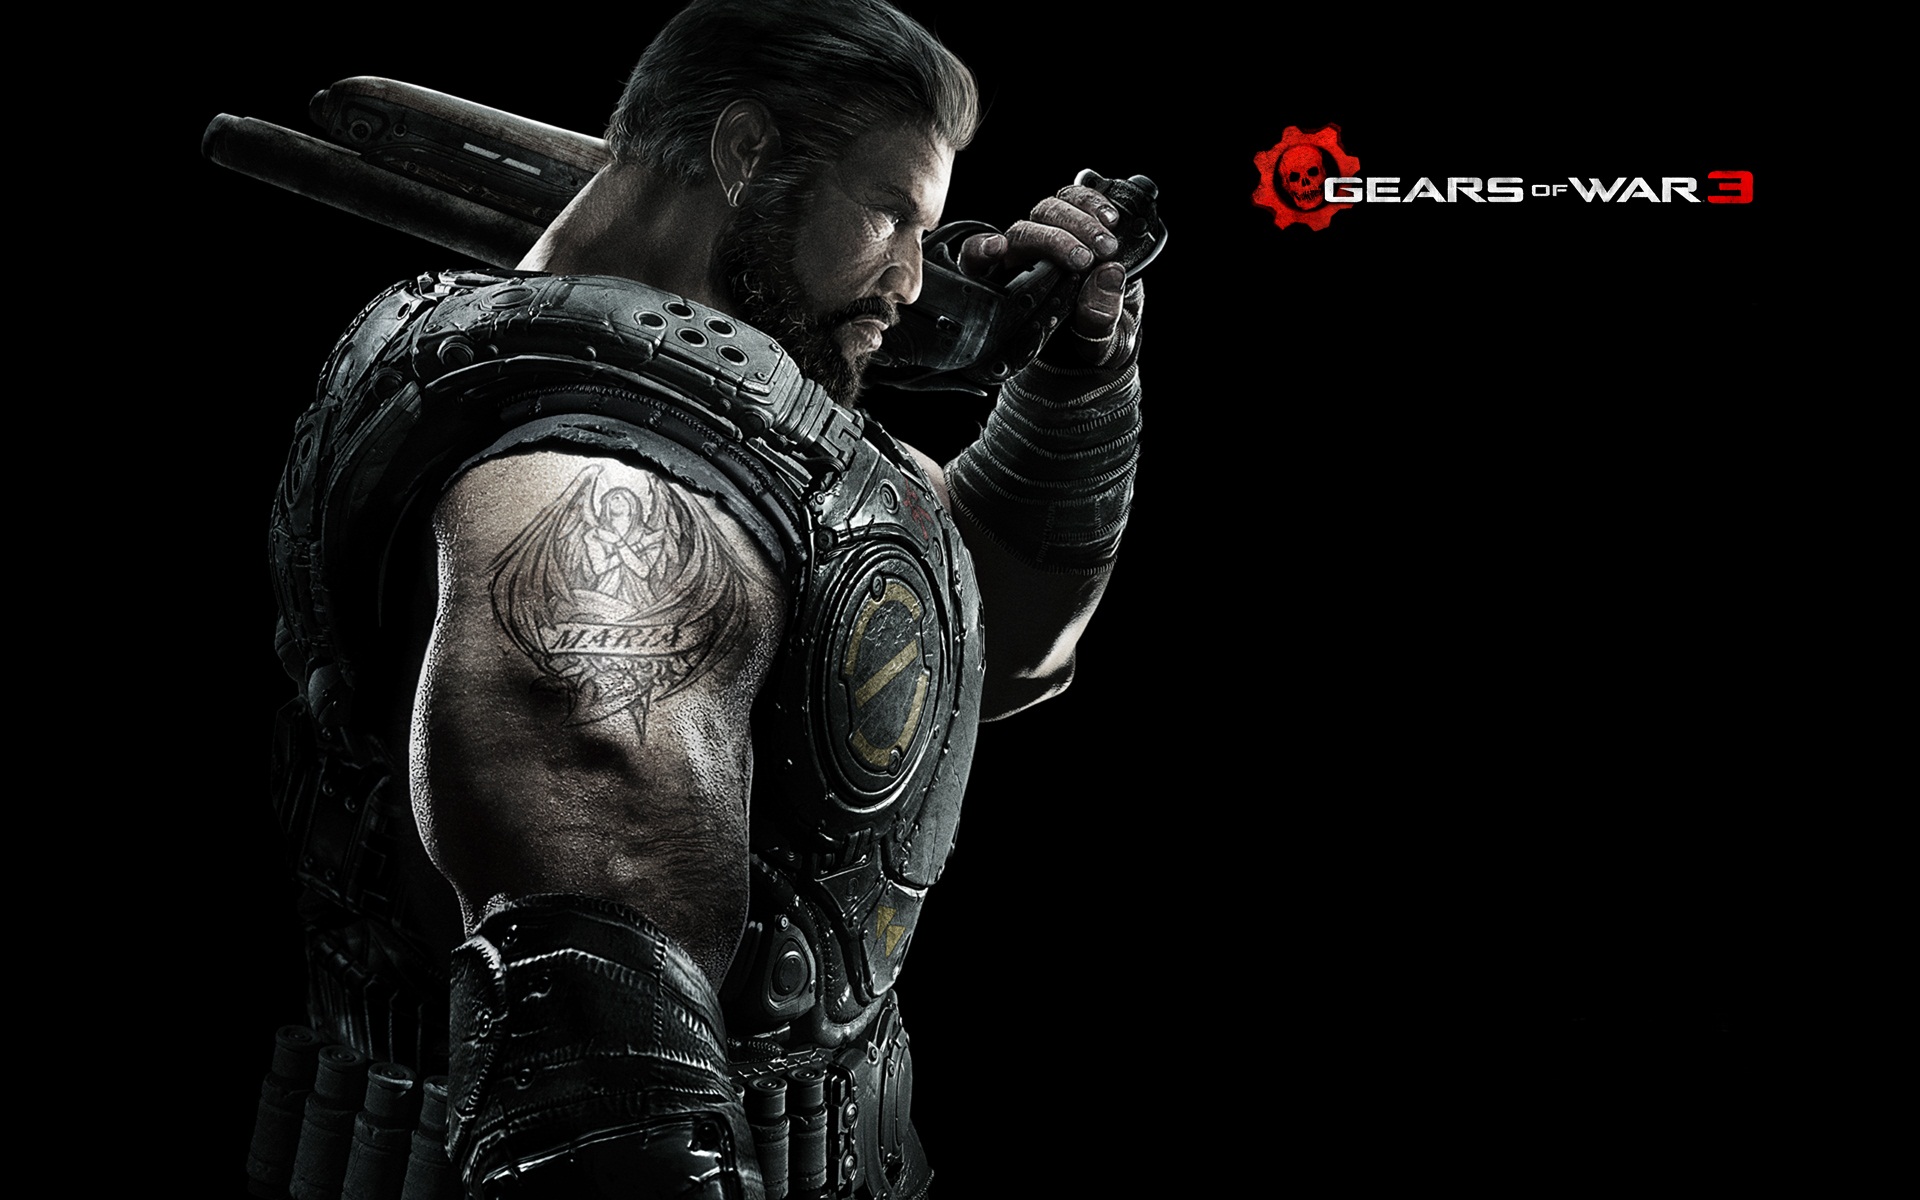 Home Browse All Dom Gears of War